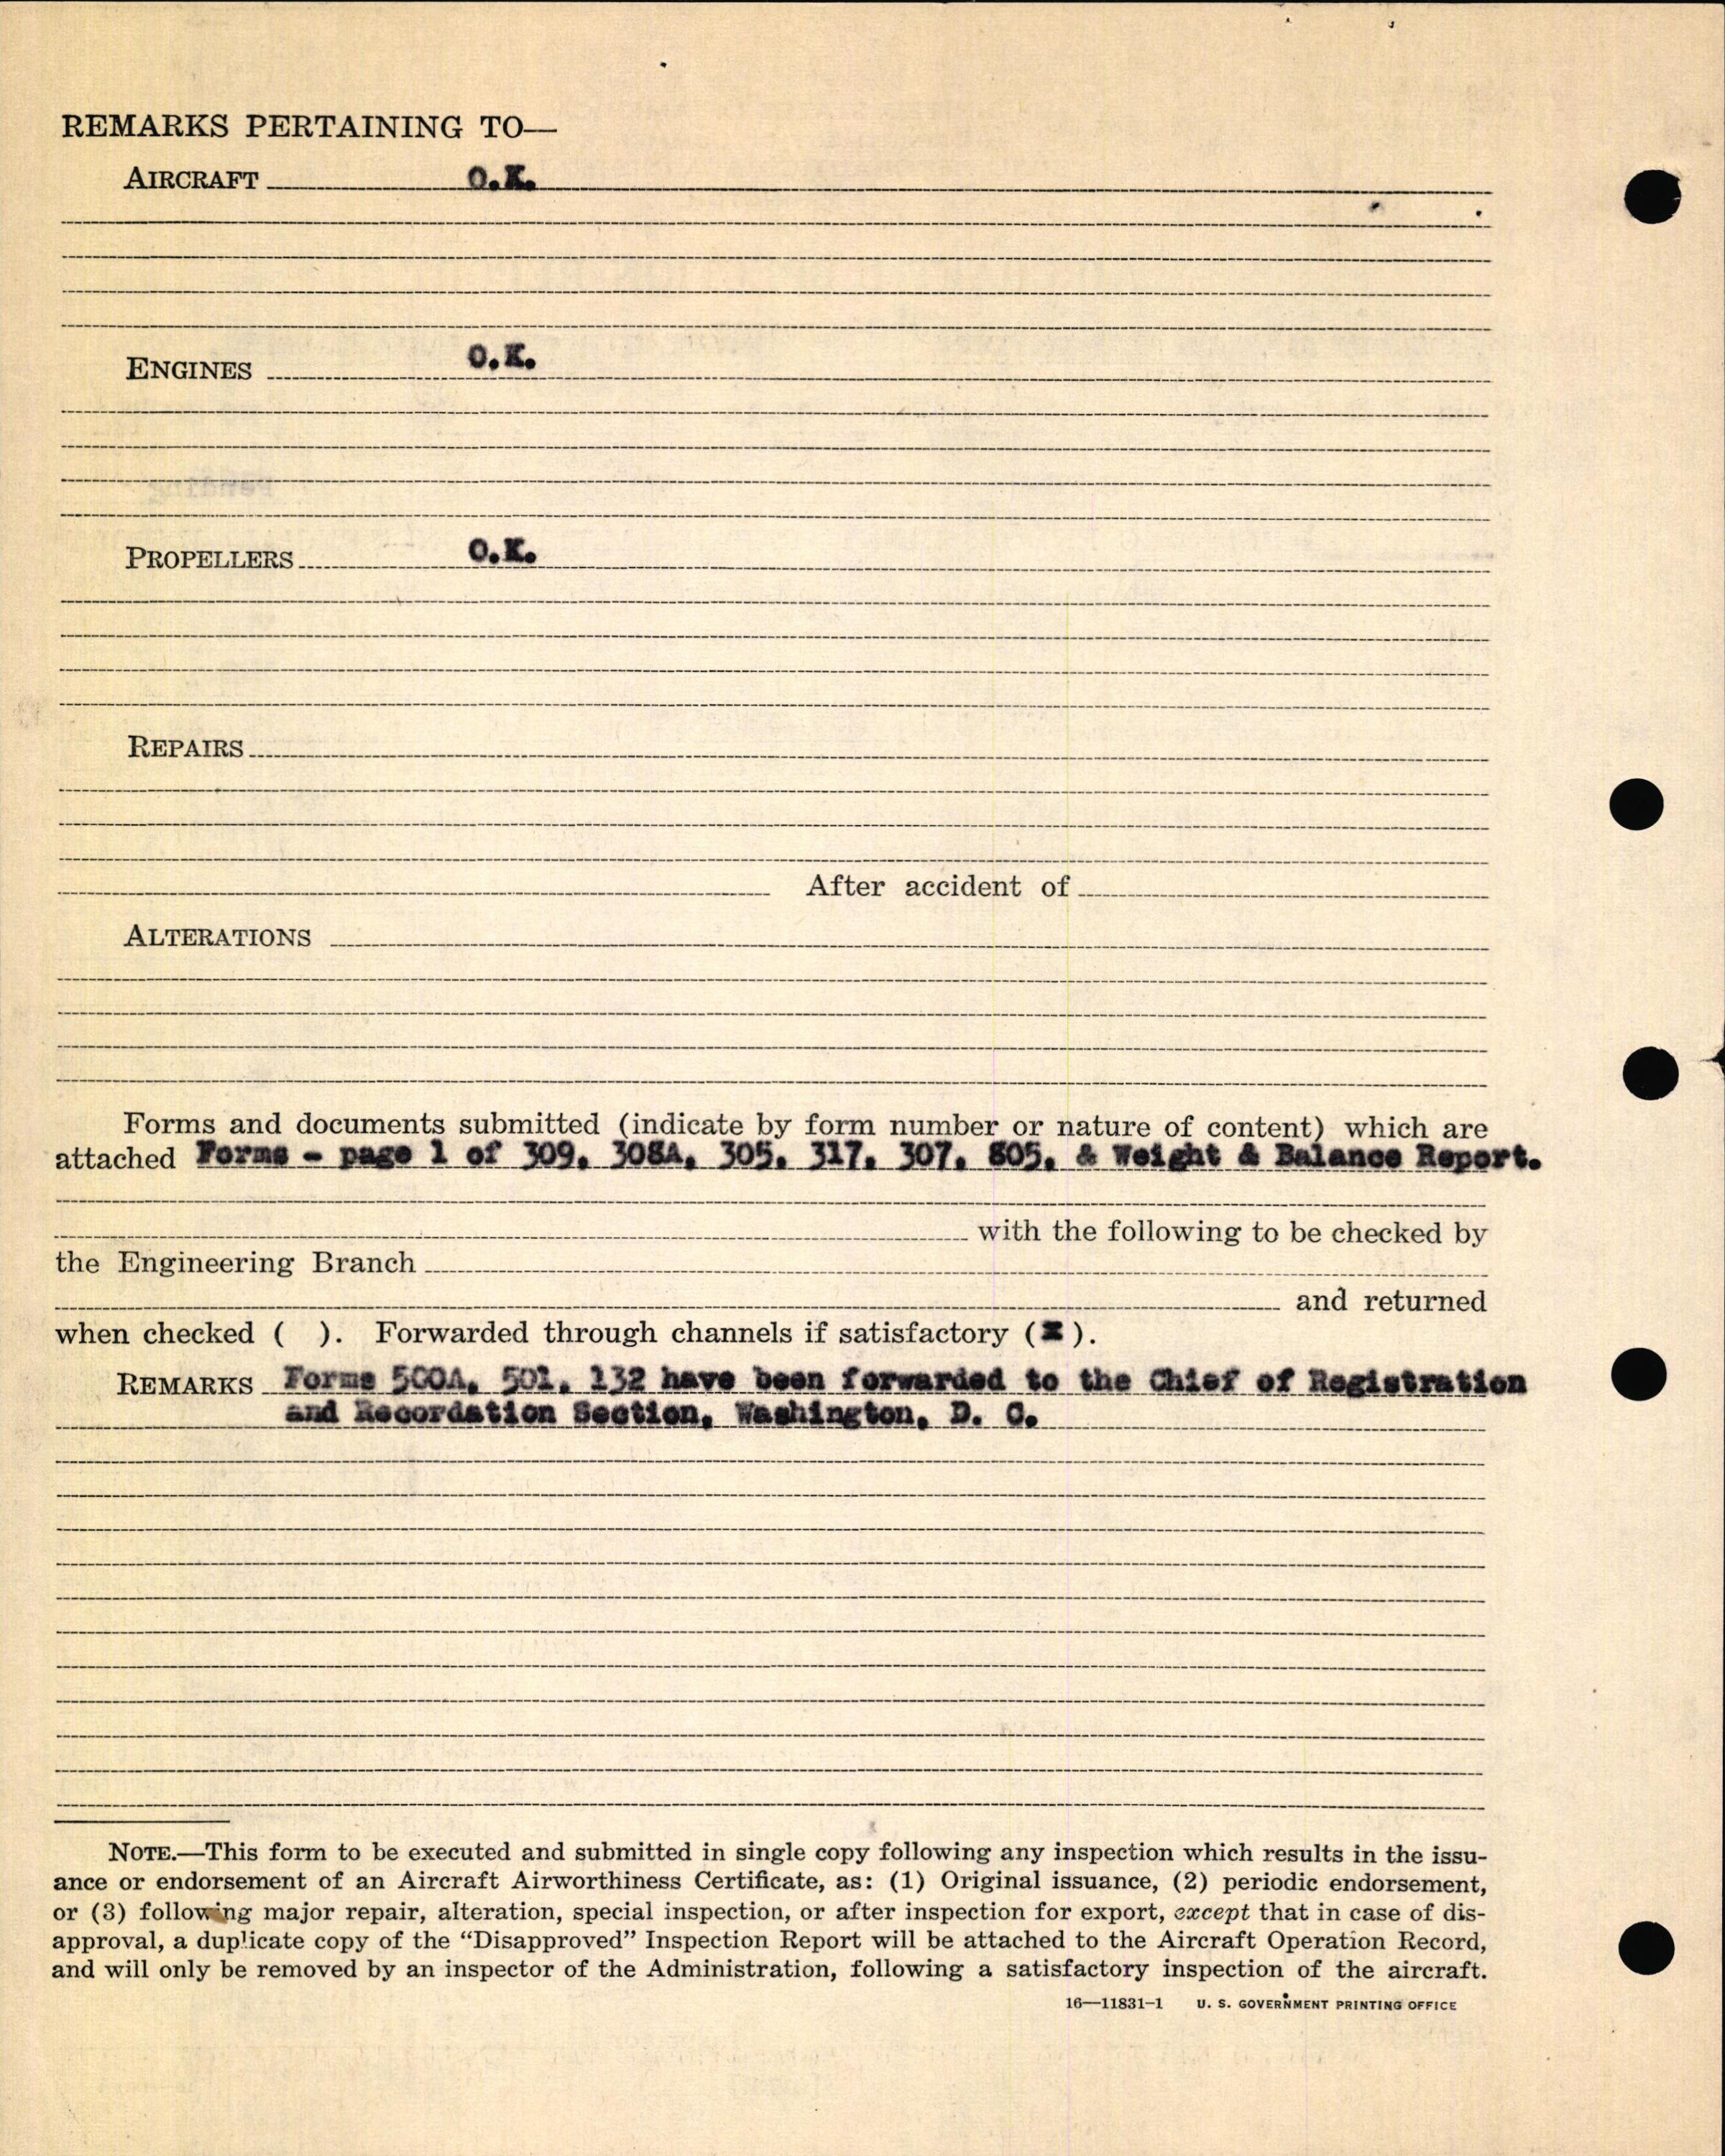 Sample page 6 from AirCorps Library document: Technical Information for Serial Number 48